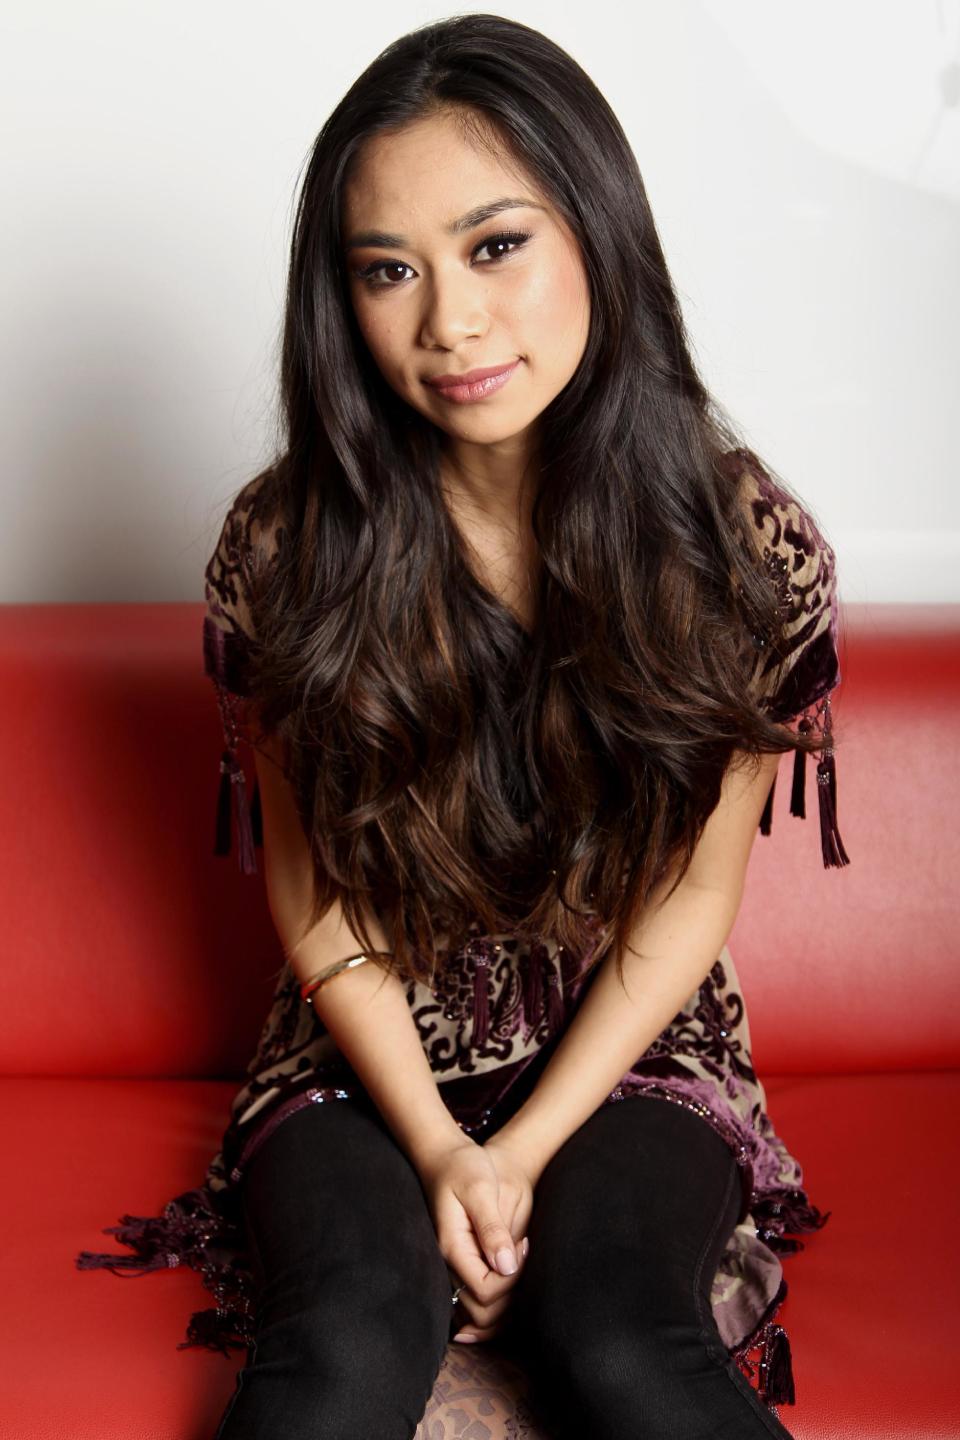 In this Tuesday, April 16, 2013 photo, singer Jessica Sanchez poses for a portrait, in Los Angeles. The petite powerhouse enjoyed singing ballads on last season's “American Idol,” where she placed second. But the 17-year-old admits that ballads aren't her only interest: Sanchez is hoping to capture a new and younger audience with her debut album, “Me, You and the Music,” released April 30. (Photo by Matt Sayles/Invision/AP, File)